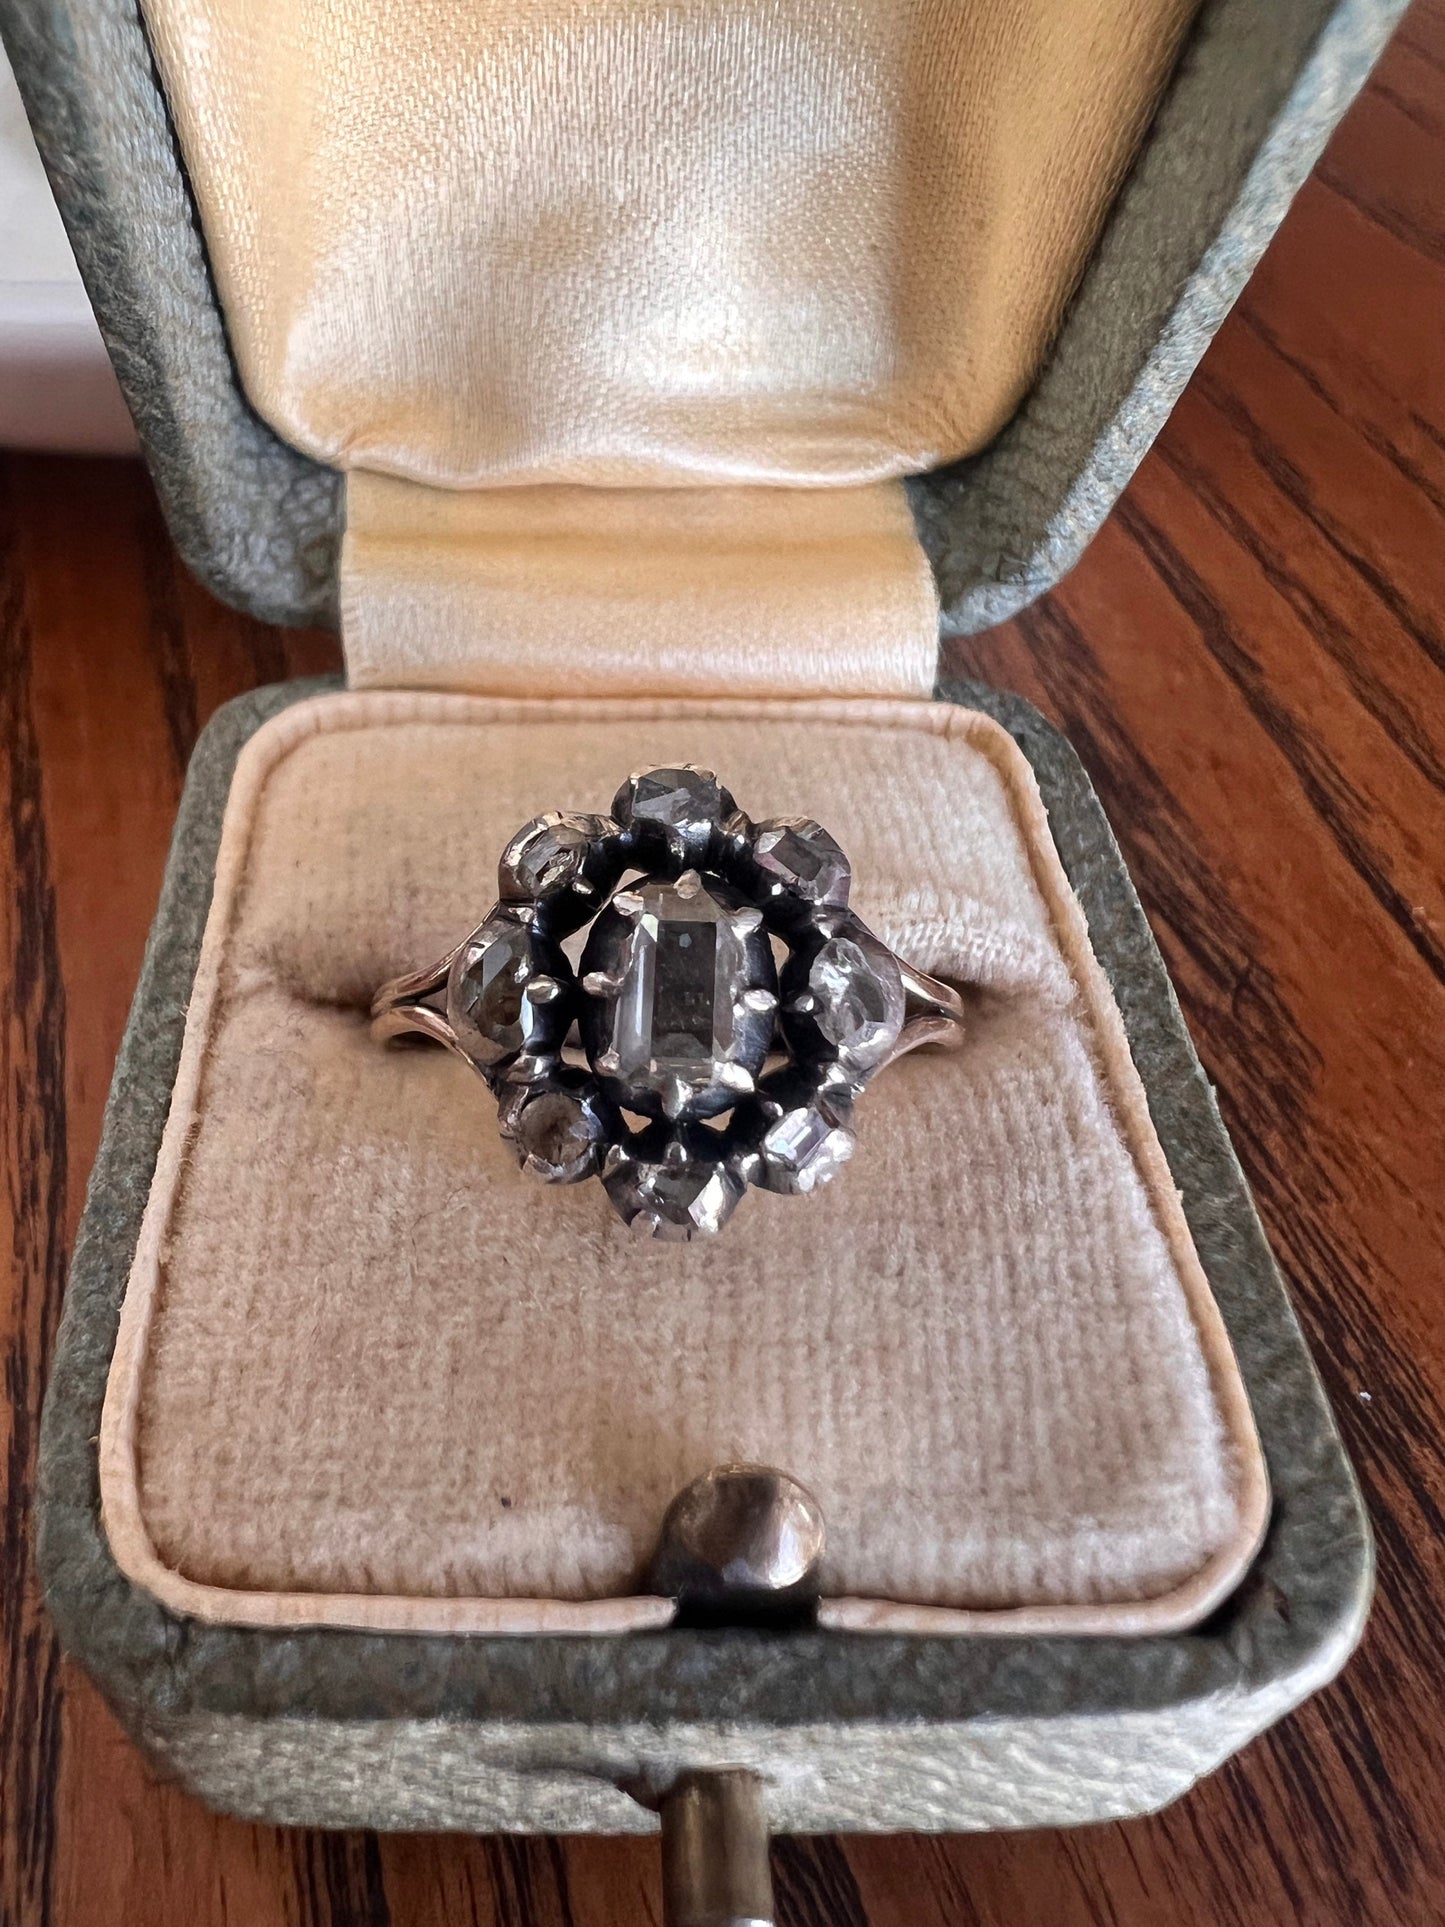 TABLE Cut DIAMOND Cluster French GEORGIAN Era Antique Ring Rose Cut 18k Gold Silver Collets Foiled Closed Back Scarce Romantic Gift 1700s